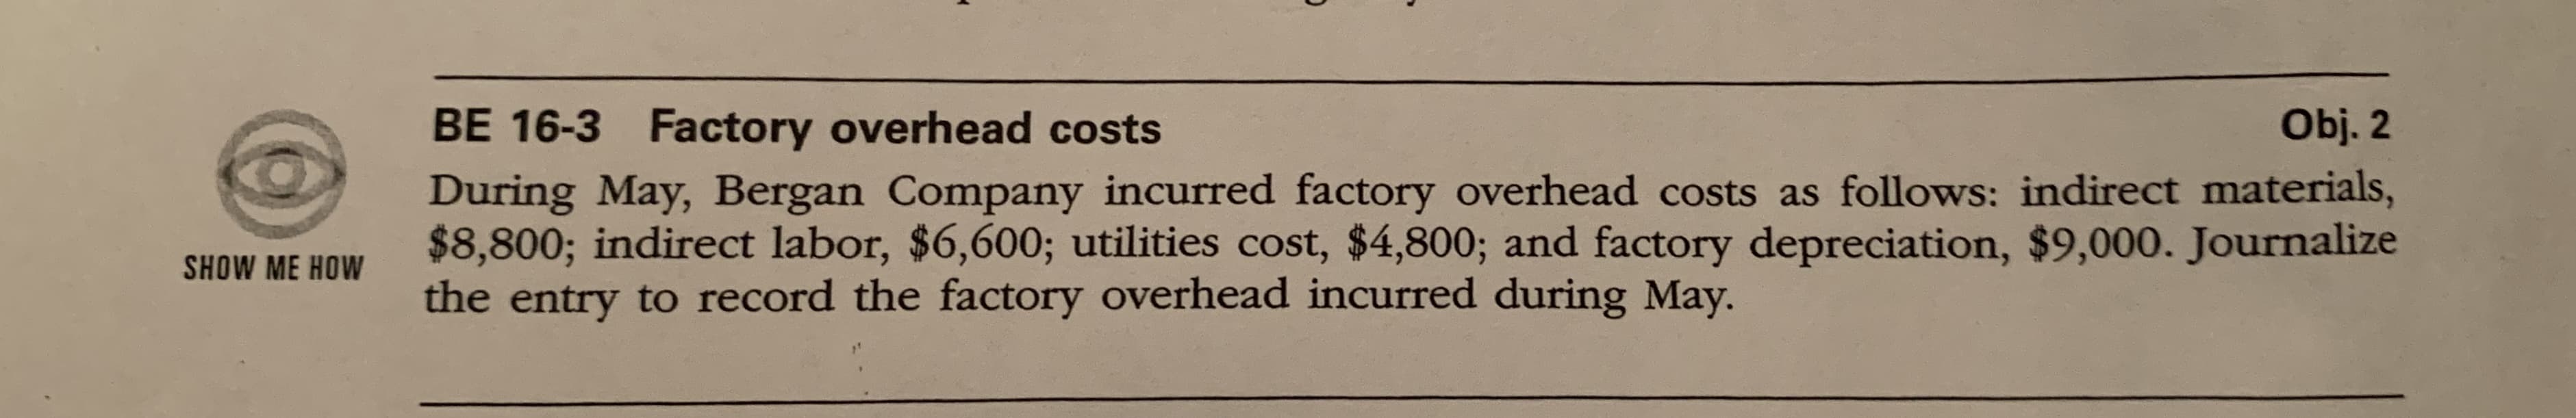 Obj. 2
BE 16-3 Factory overhead costs
During May, Bergan Company incurred factory overhead costs as follows: indirect materials,
$8,800; indirect labor, $6,600; utilities cost, $4,800; and factory depreciation, $9,000. Journalize
the entry to record the factory overhead incurred during May.
SHOW ME HOW
